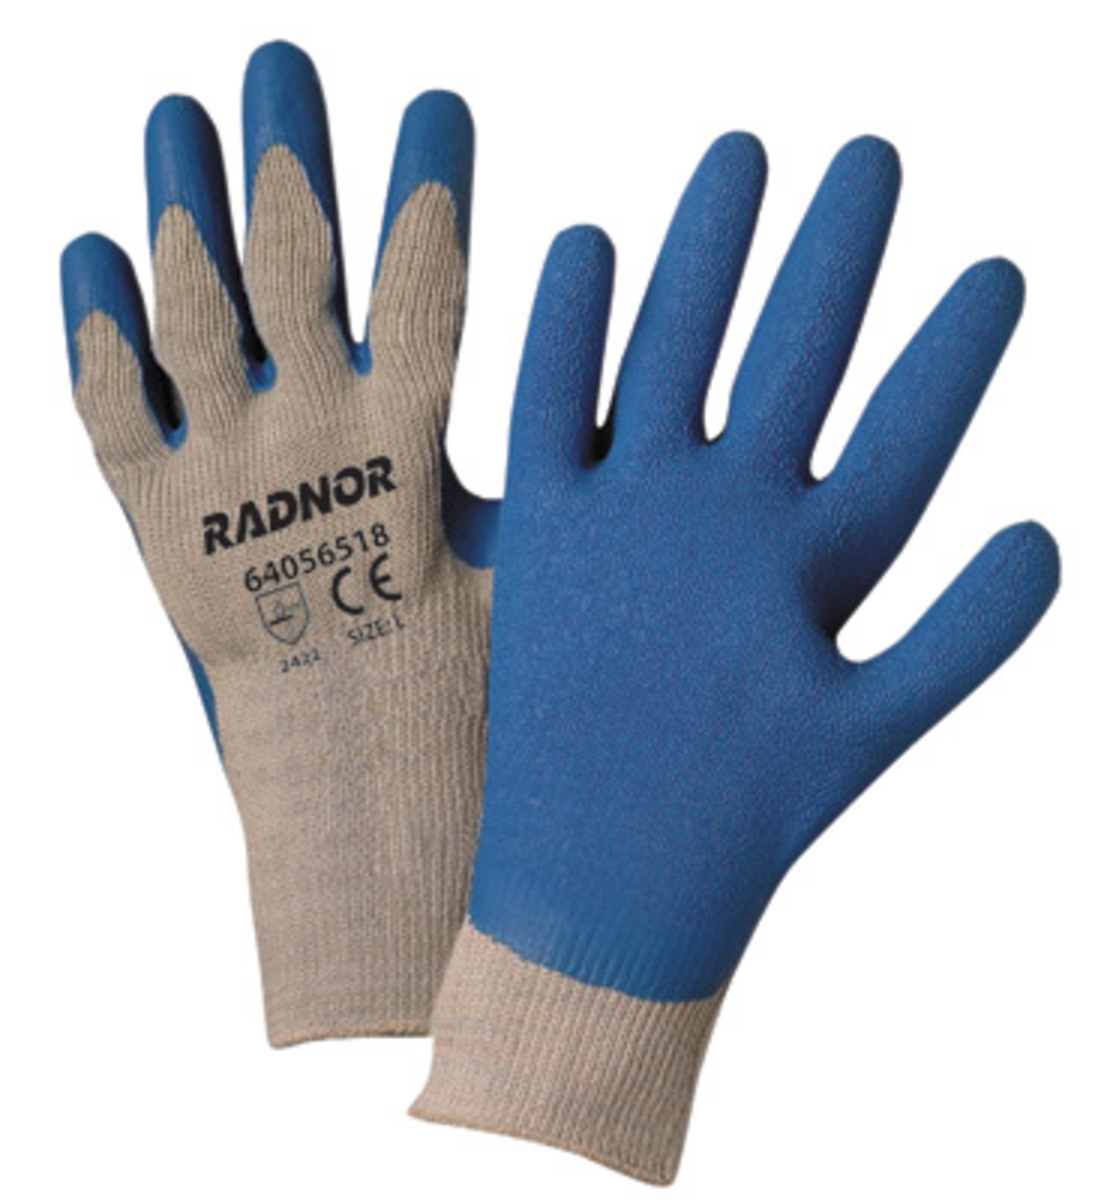 Ceco RB2101B-L (2) Work Gloves Polyester/Cotton 10 Gauge Blue Latex Palm Coated L - MPR Tools & Equipment